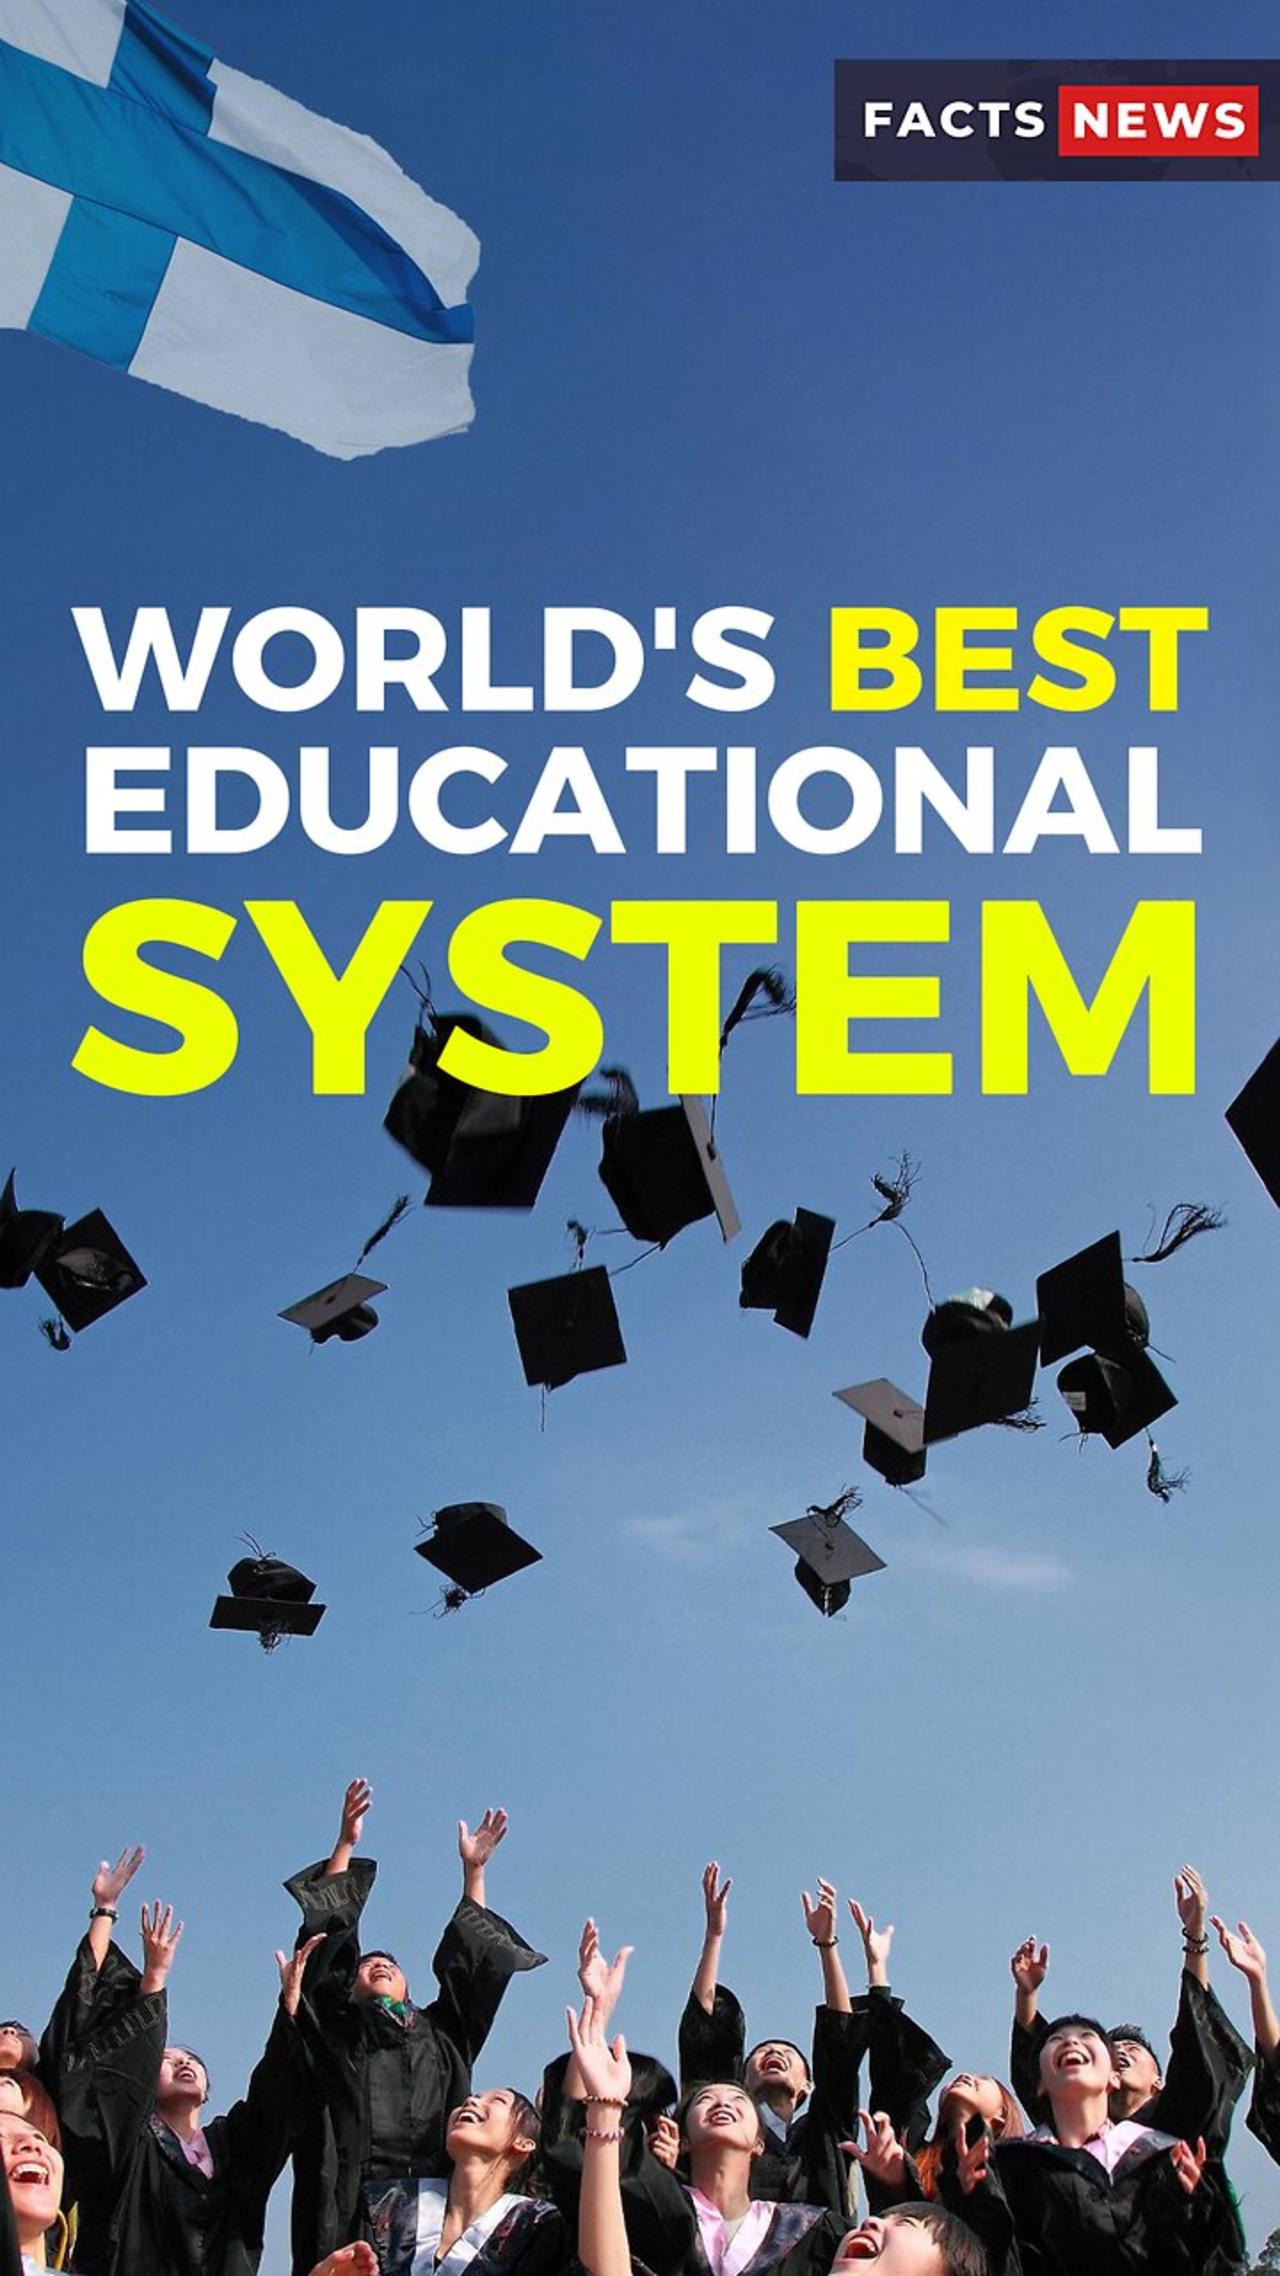 World's best educational system #factsnews #shorts